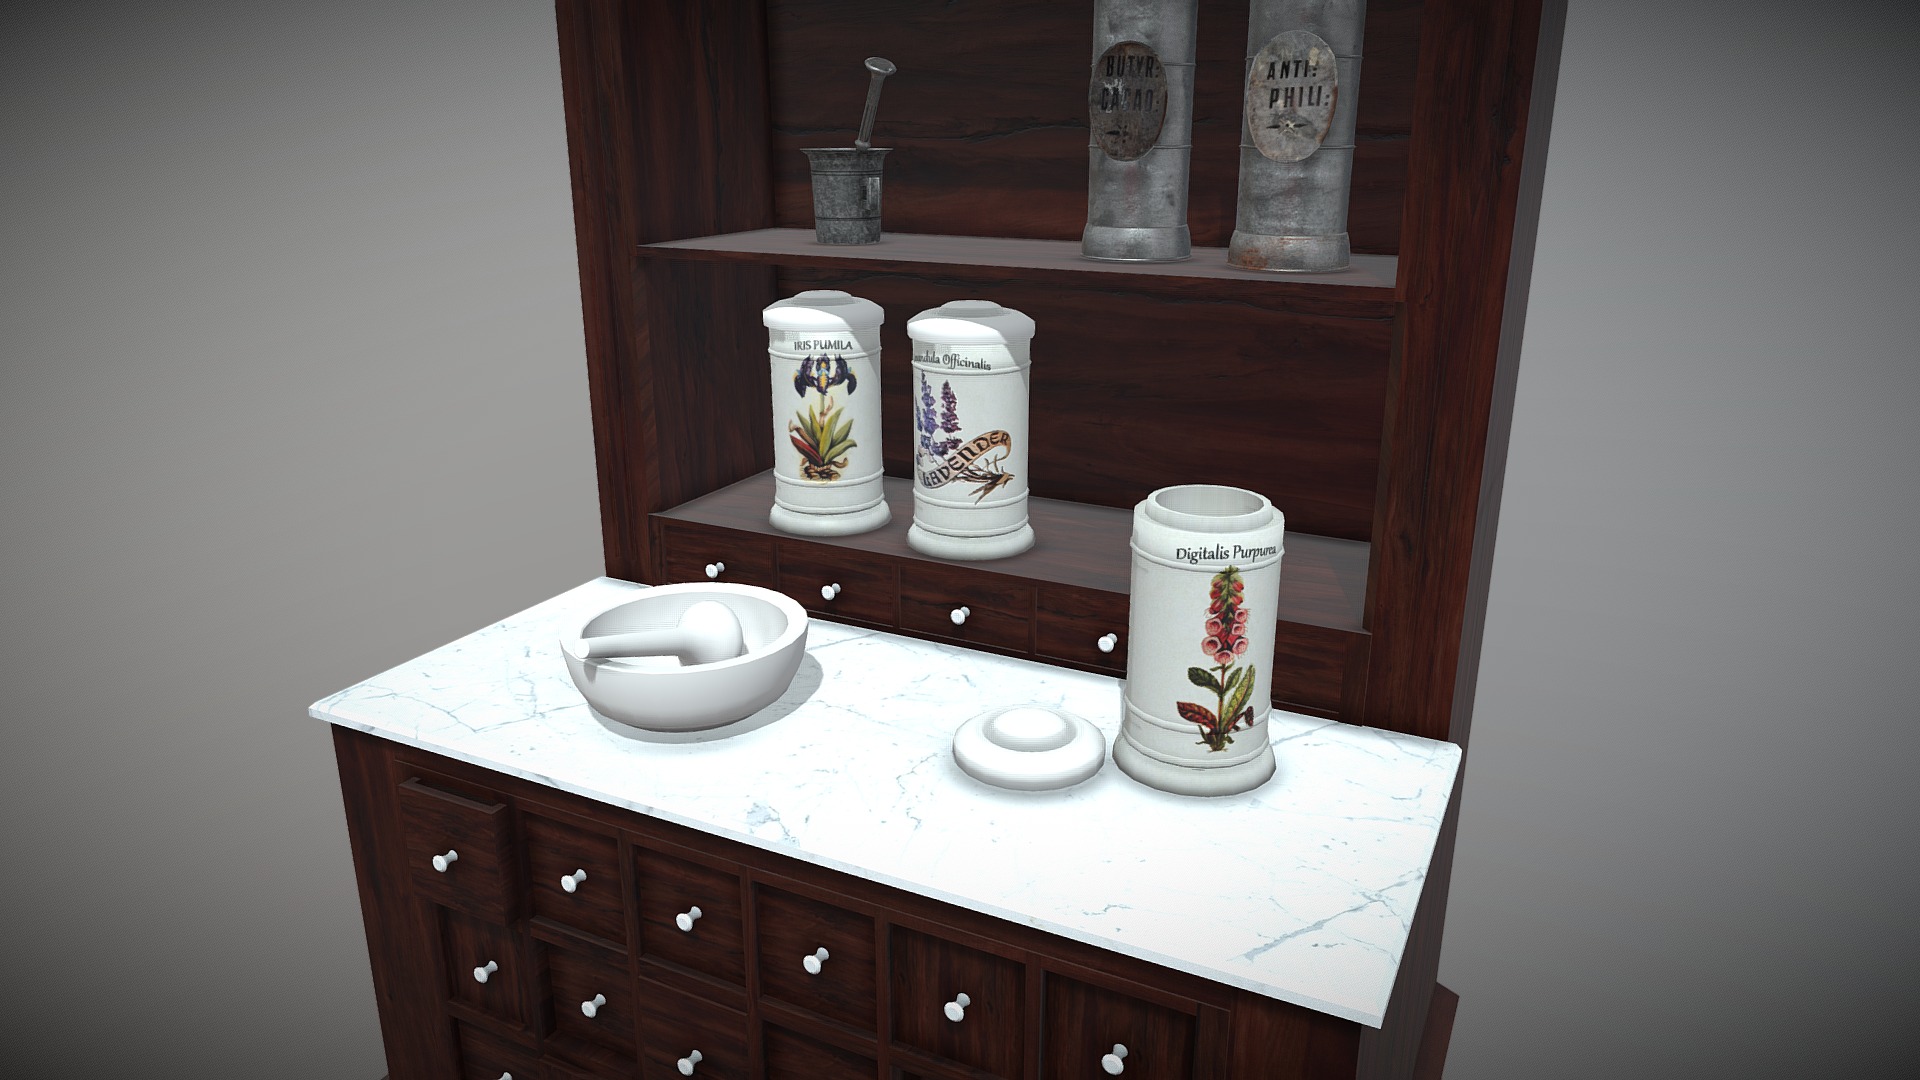 3D model Pharmacy Vases - This is a 3D model of the Pharmacy Vases. The 3D model is about a counter with cups and saucers on it.